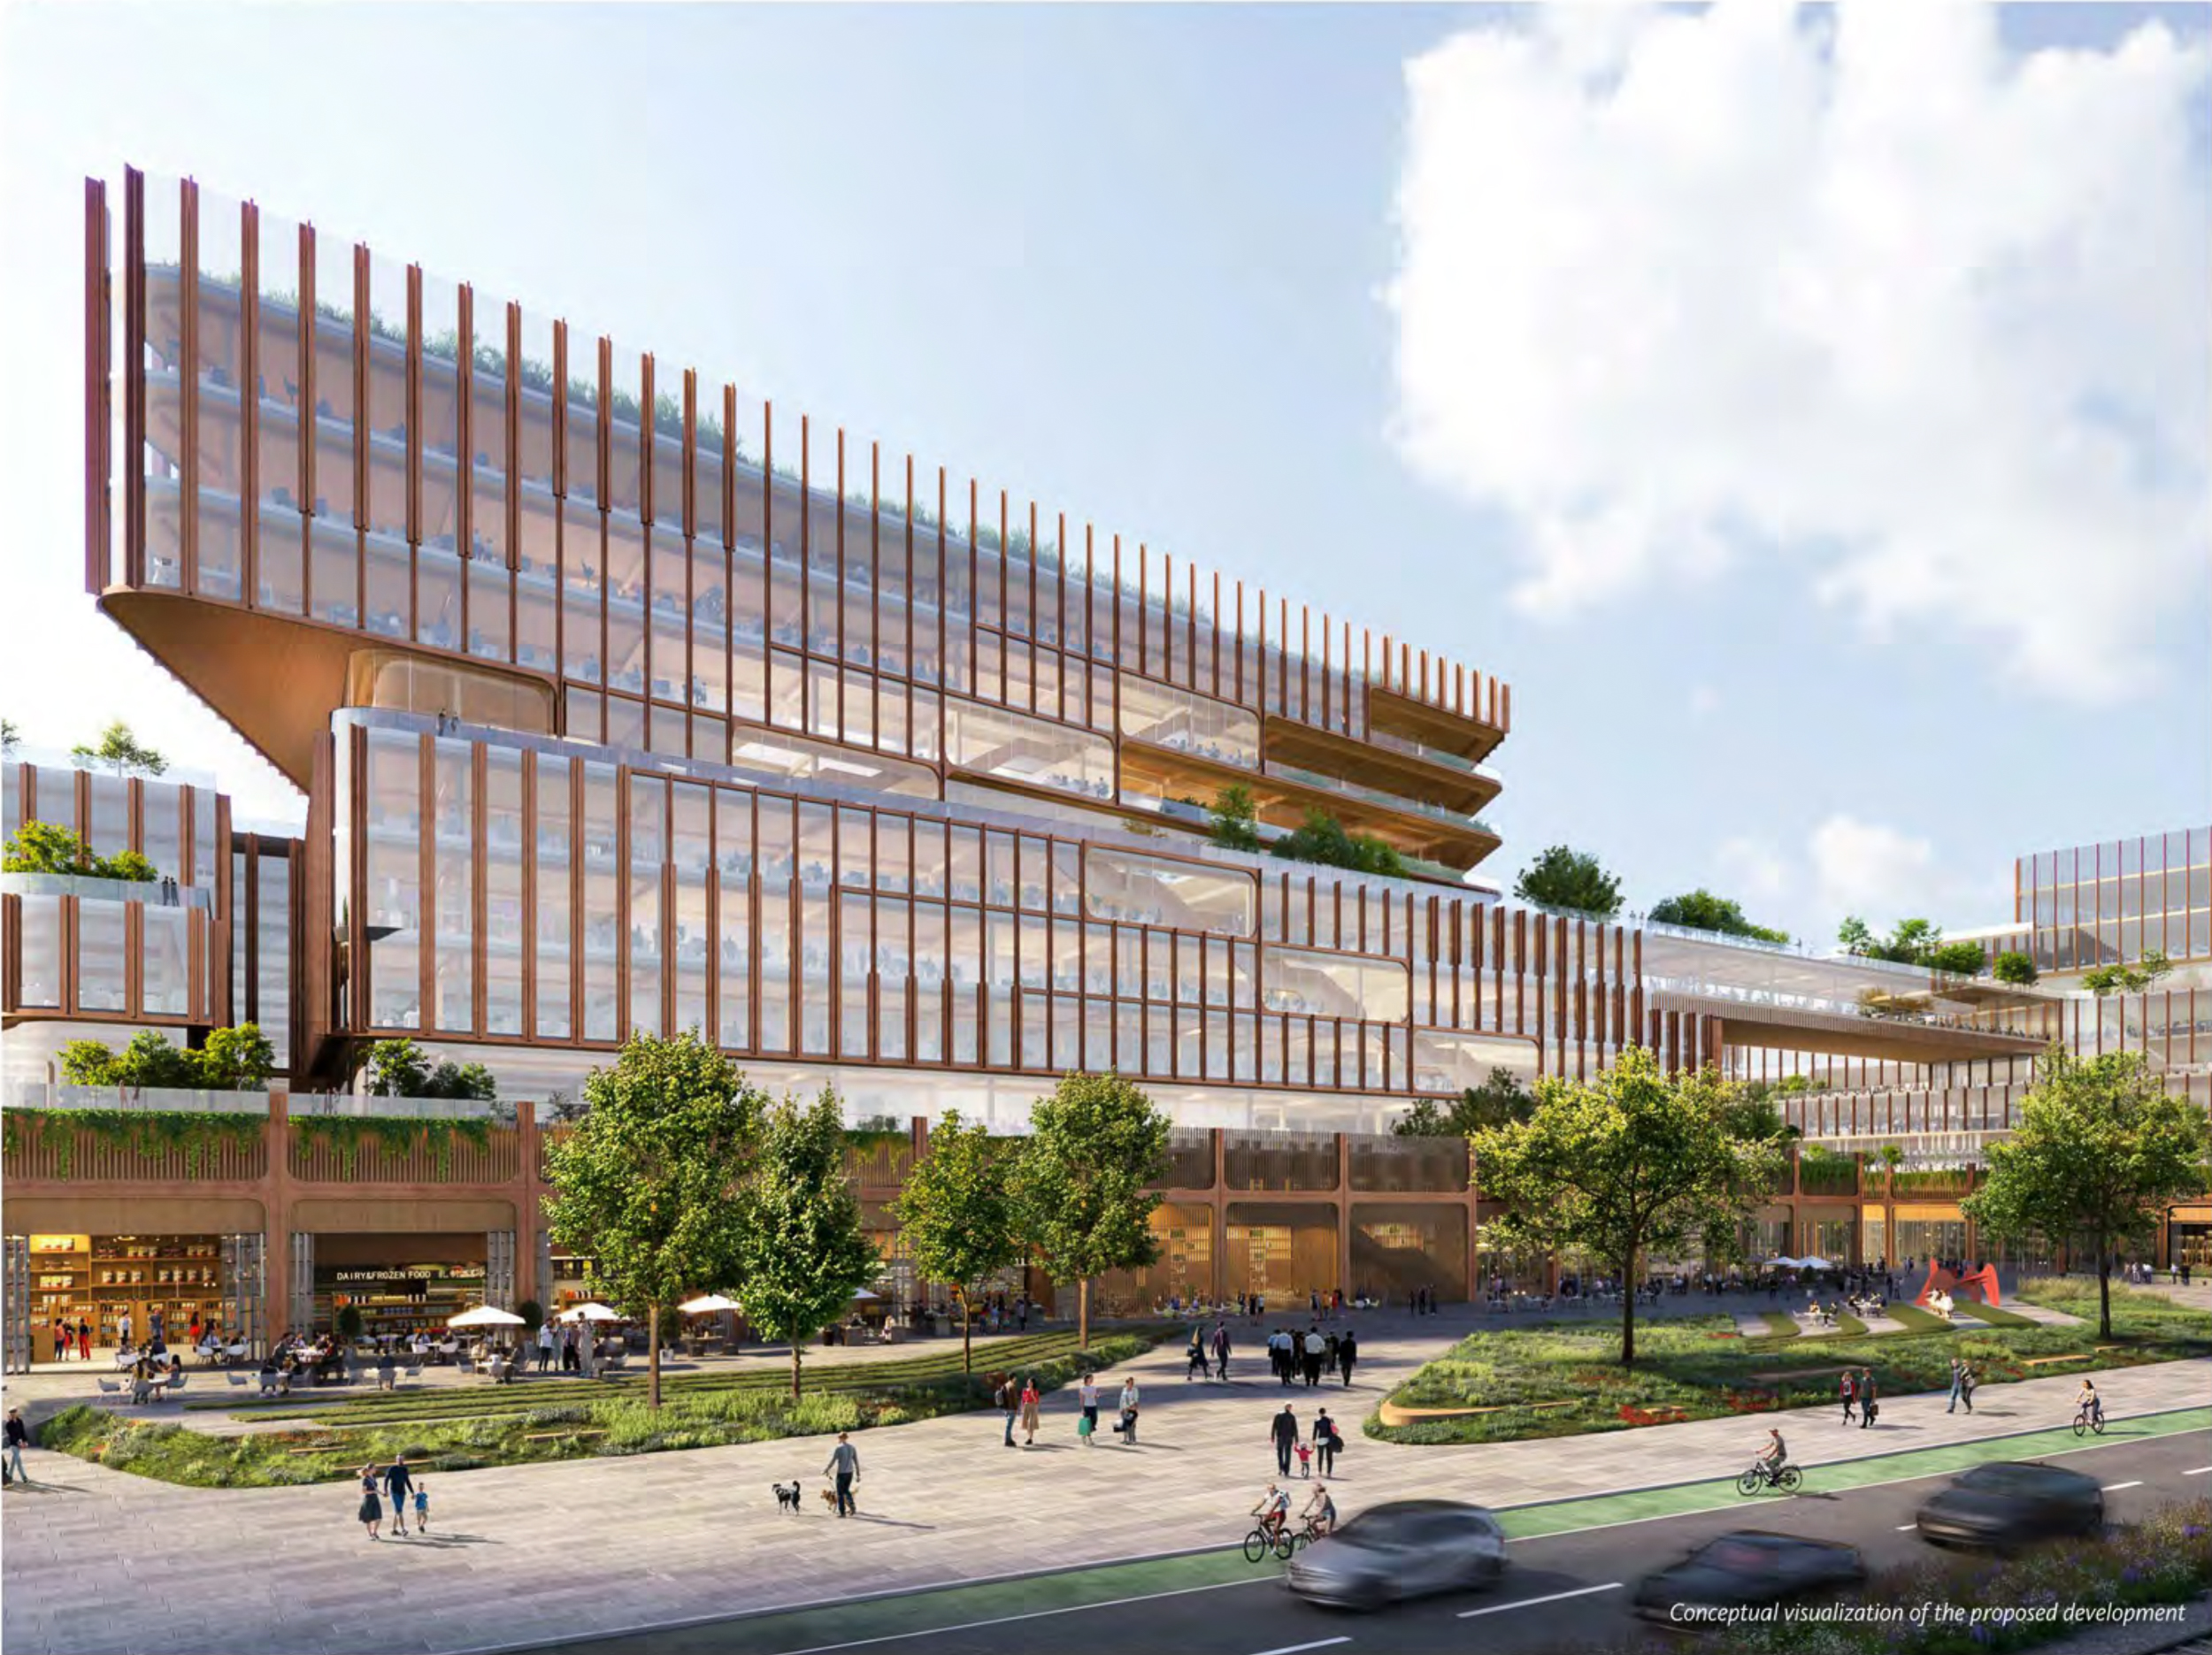 Mission Point office building proposal, rendering by Gensler